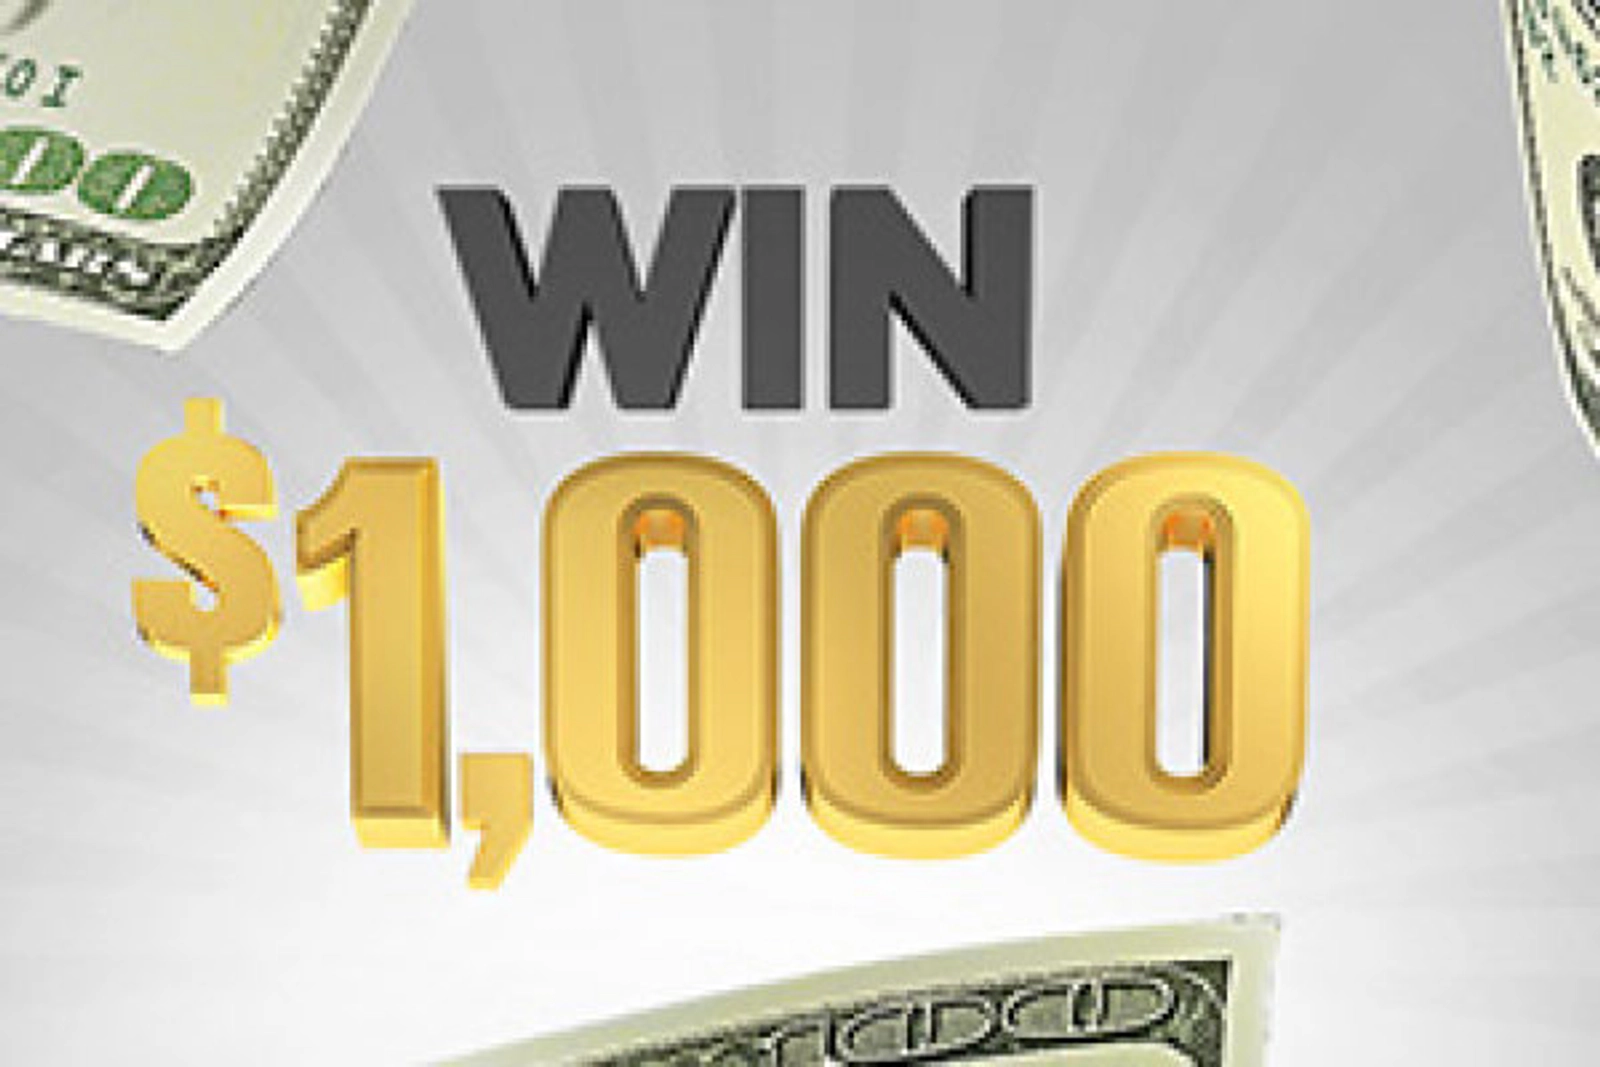   Listen to Win a Grand in your hand!  - Thumbnail Image